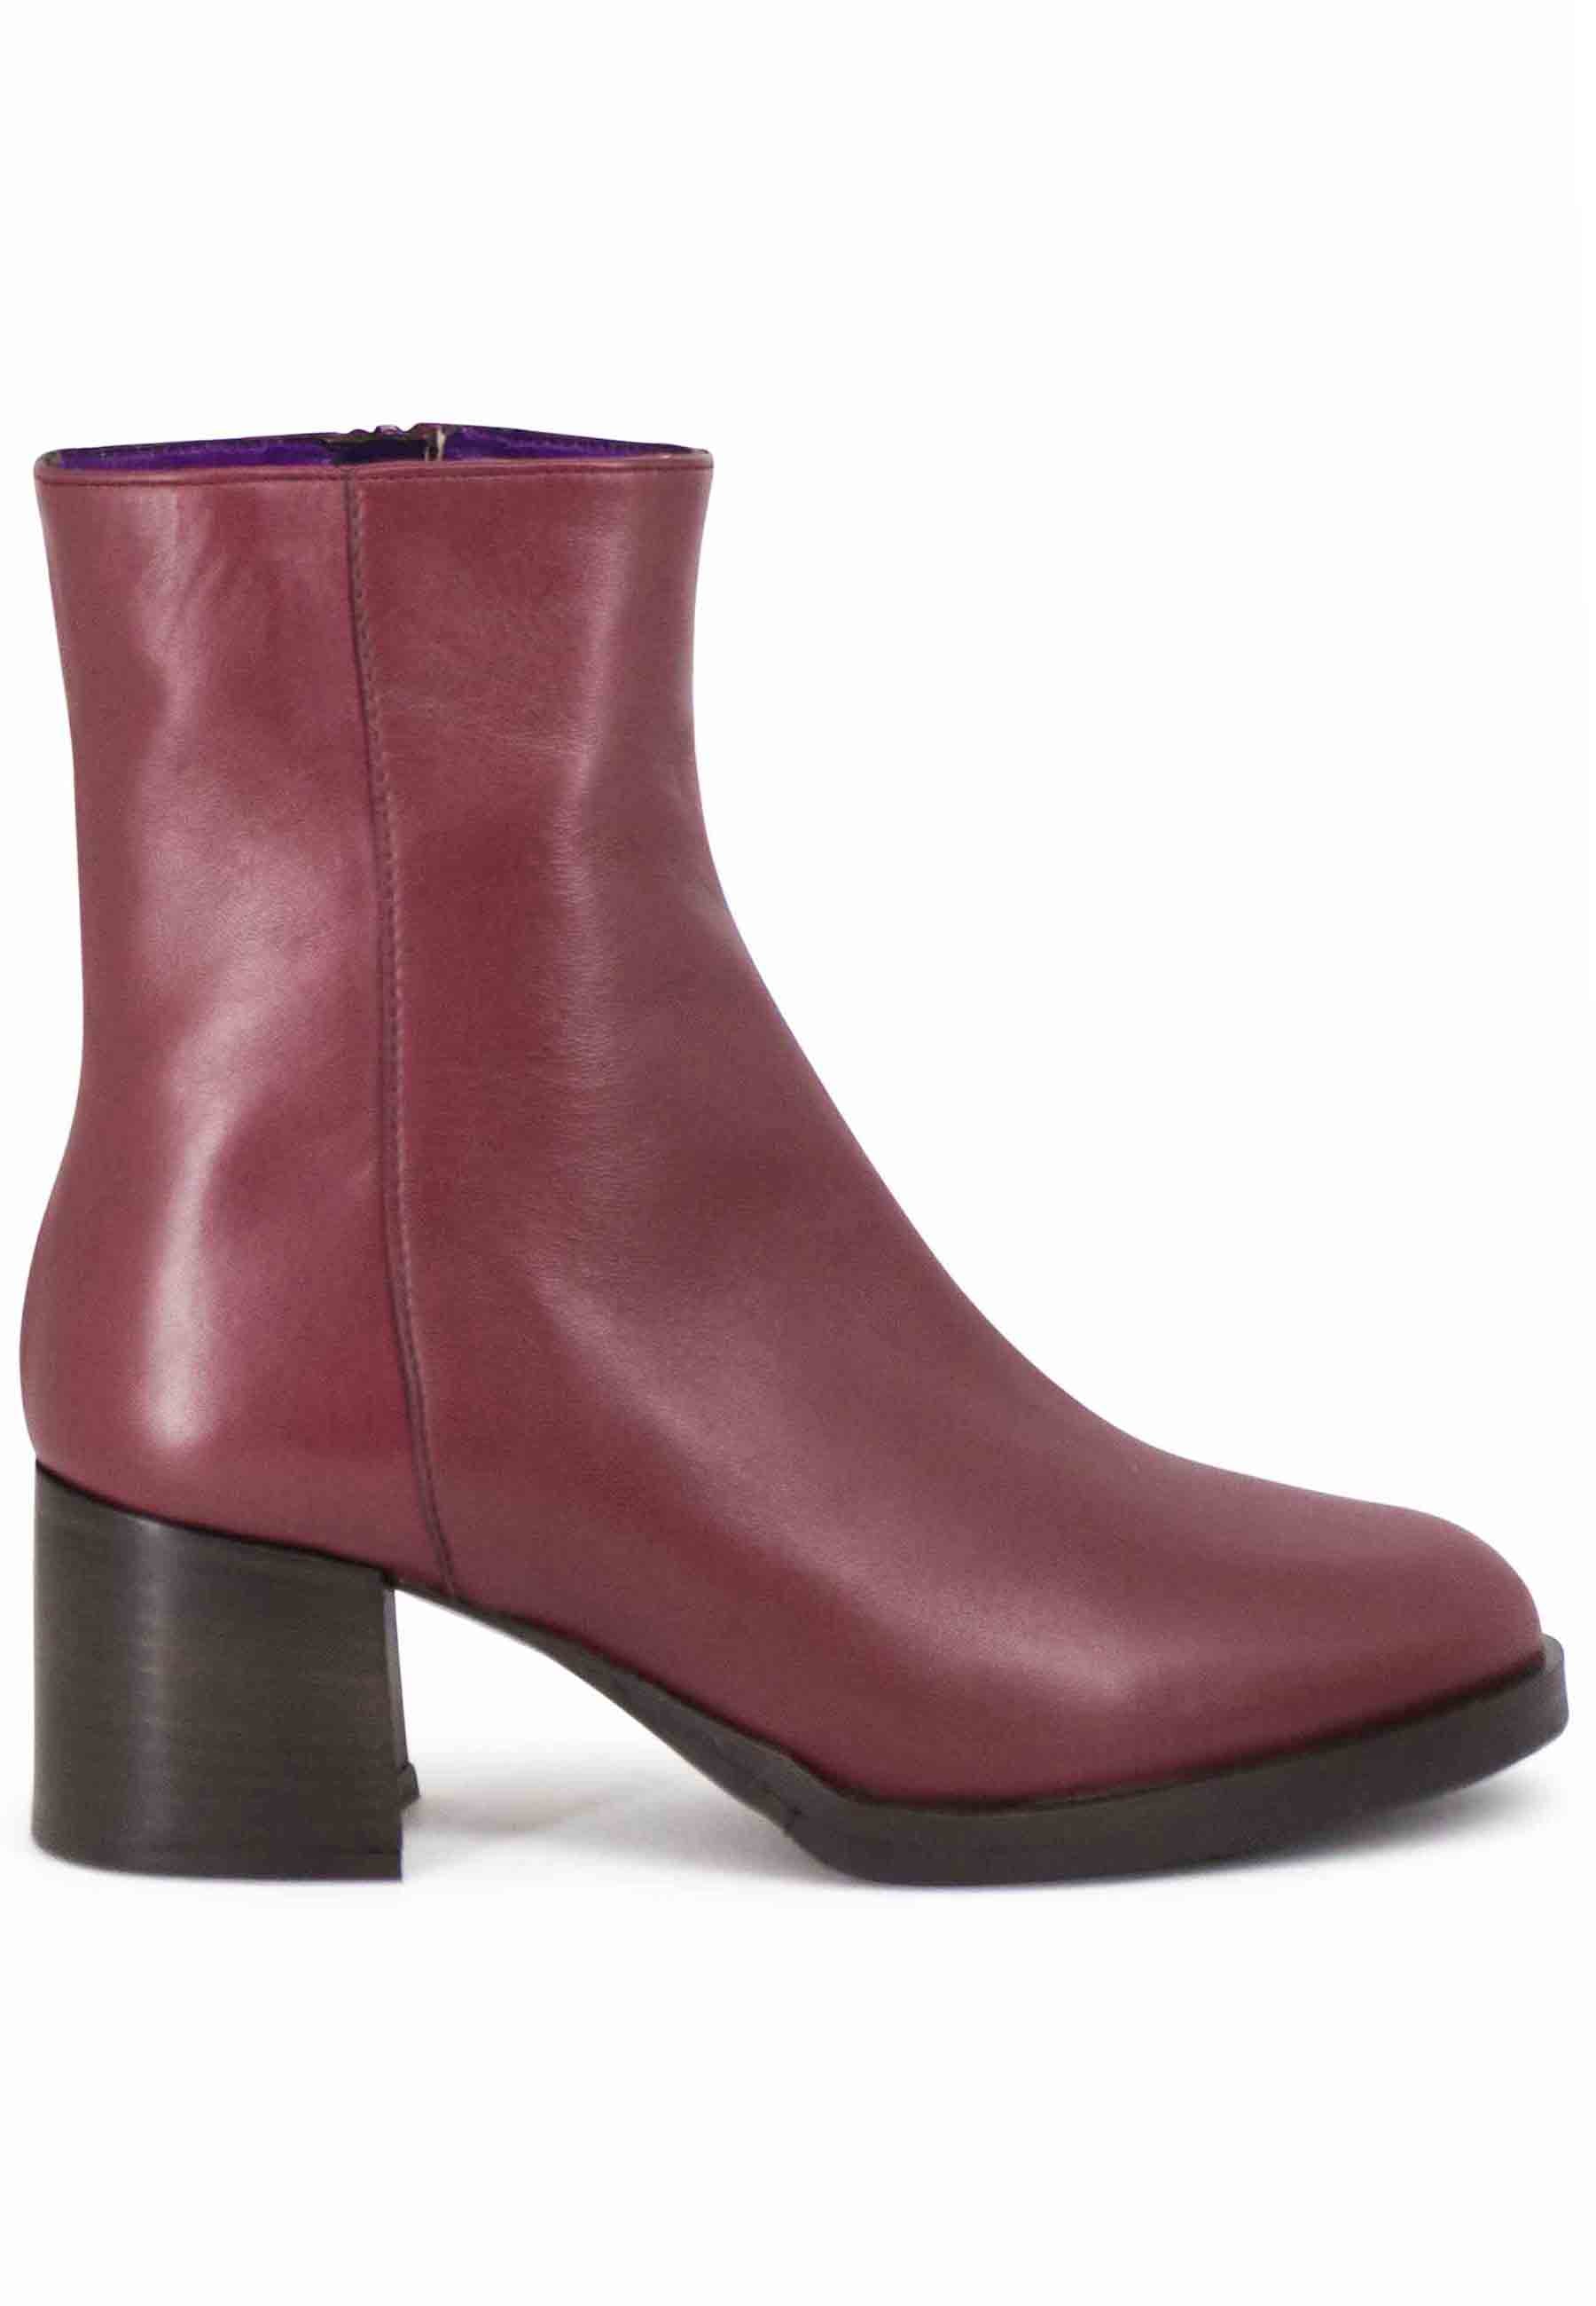 Women's low heel red leather ankle boots